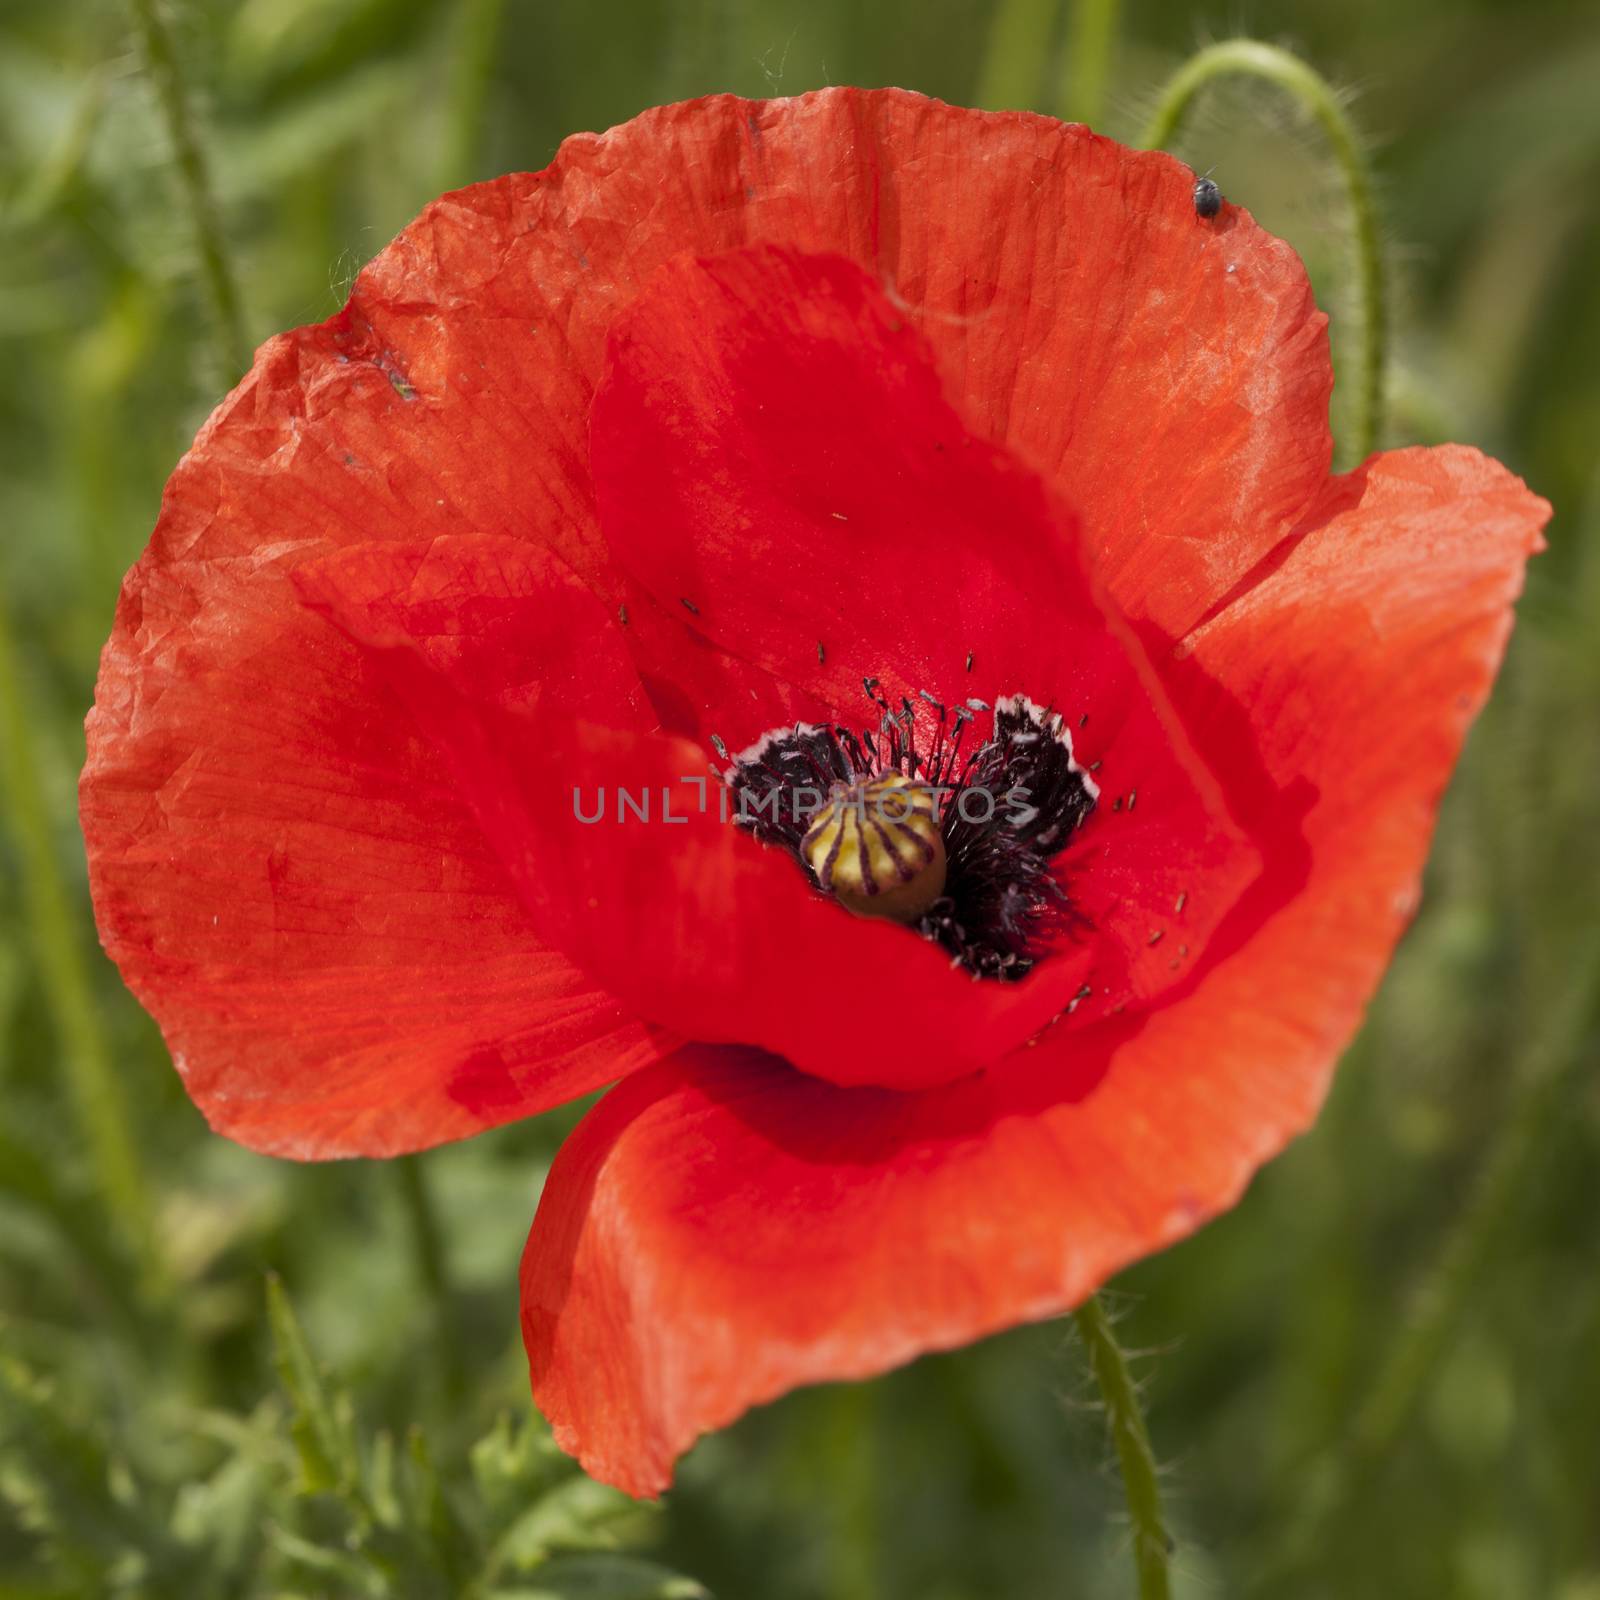 Red poppy in a grass field, close up